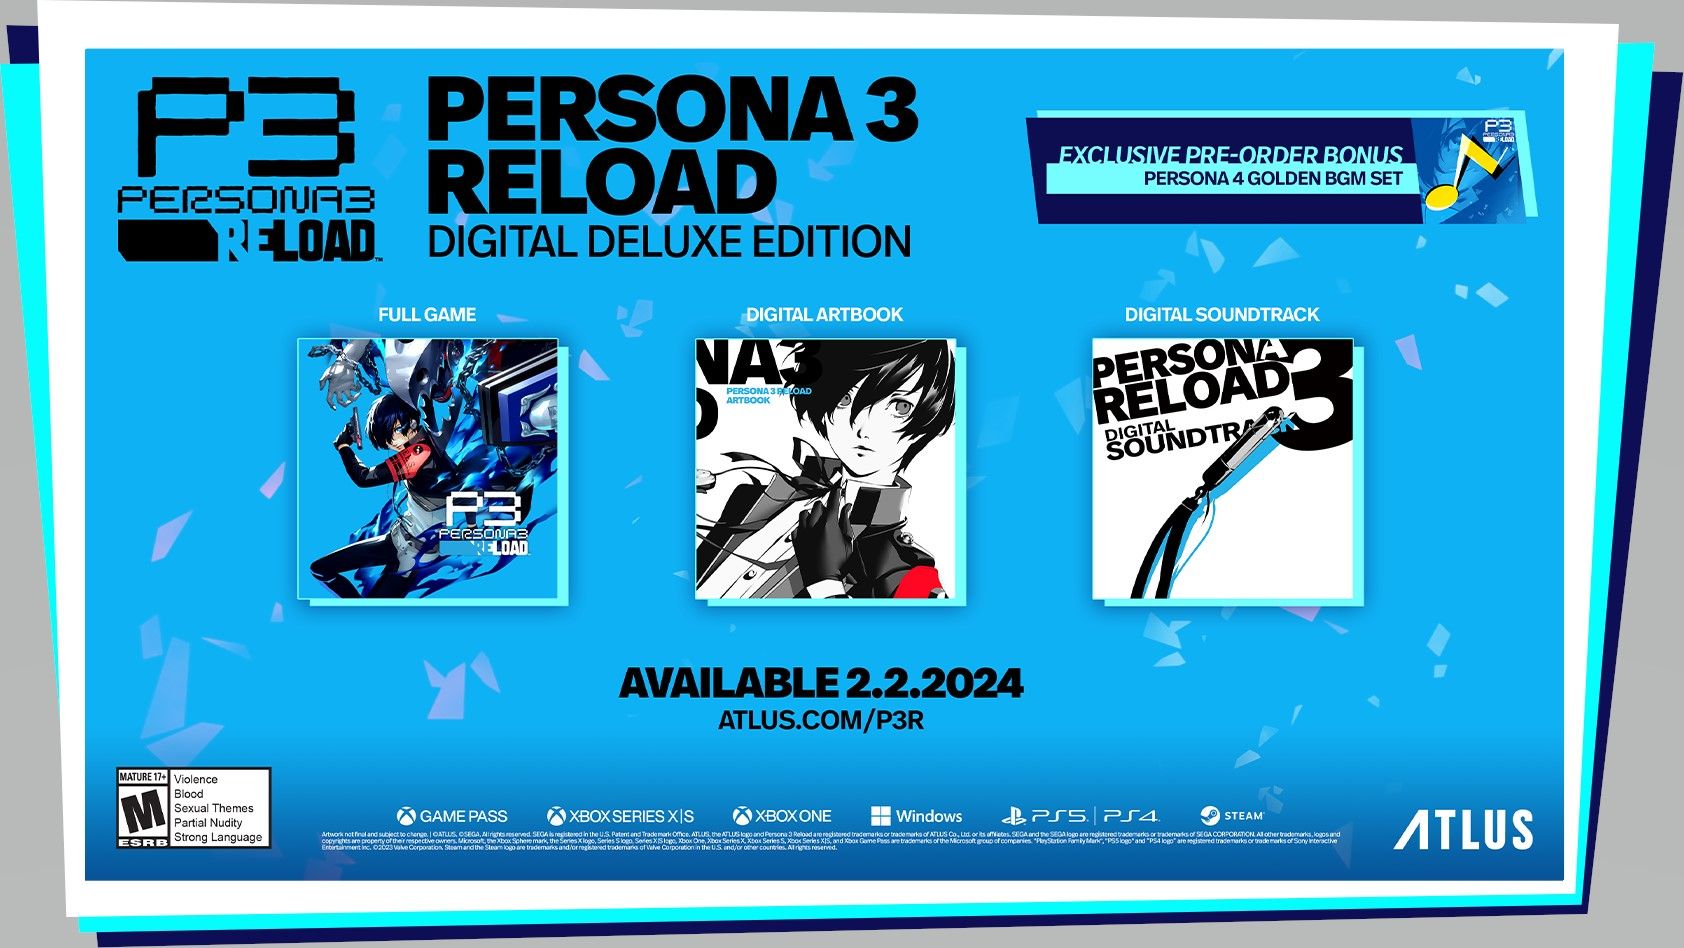 Persona 3 Reload Editions Explained